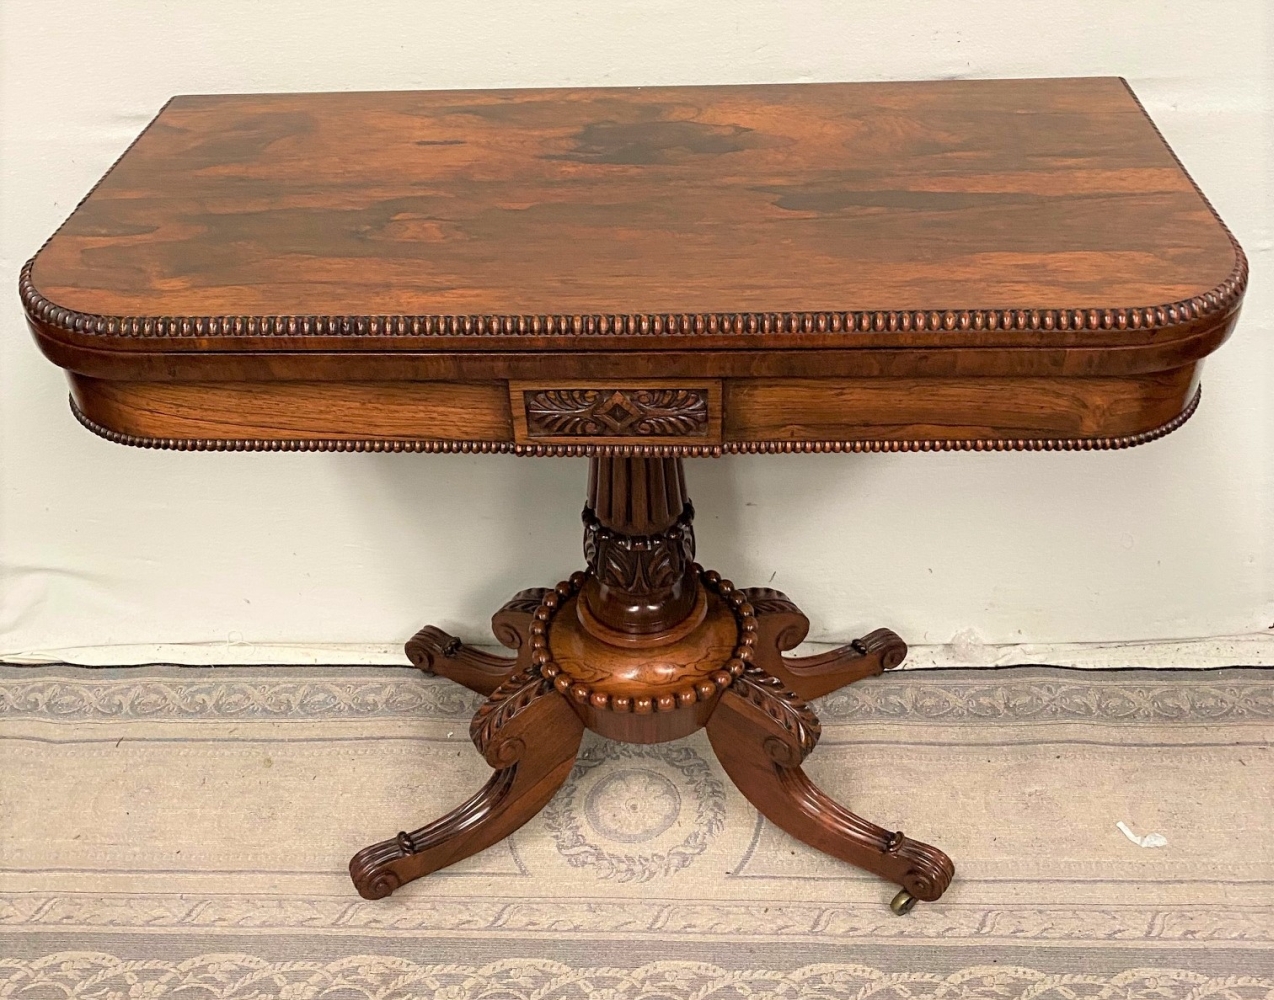 A VERY FINE REGENCY ROSEWOOD FOLD OVER CARD TABLE, with gadrooned rim to the curved fold over top, a